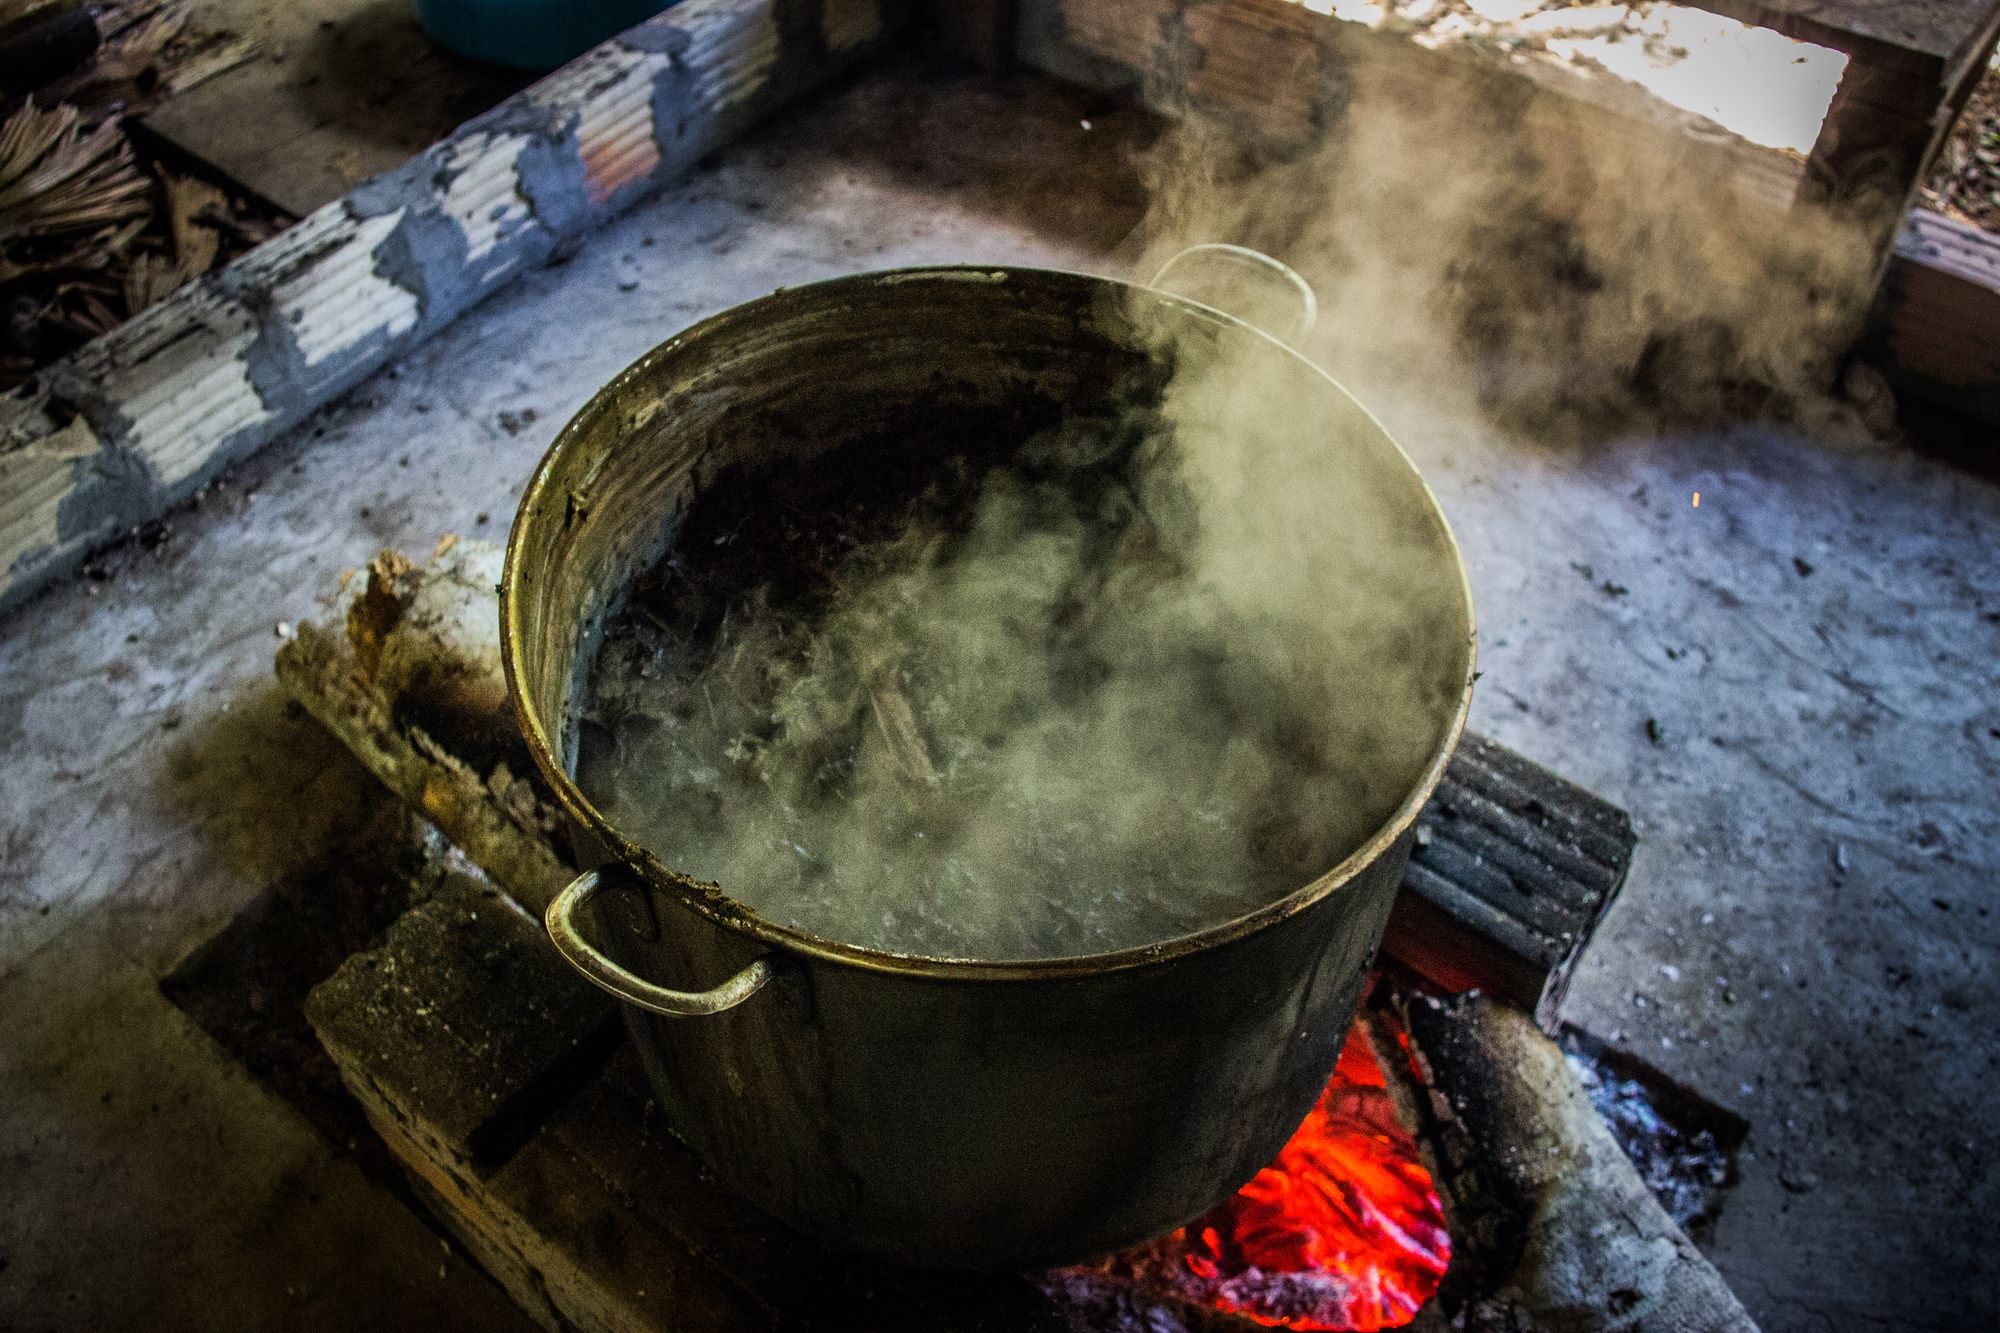 Pot of ayahuasca being brewed.